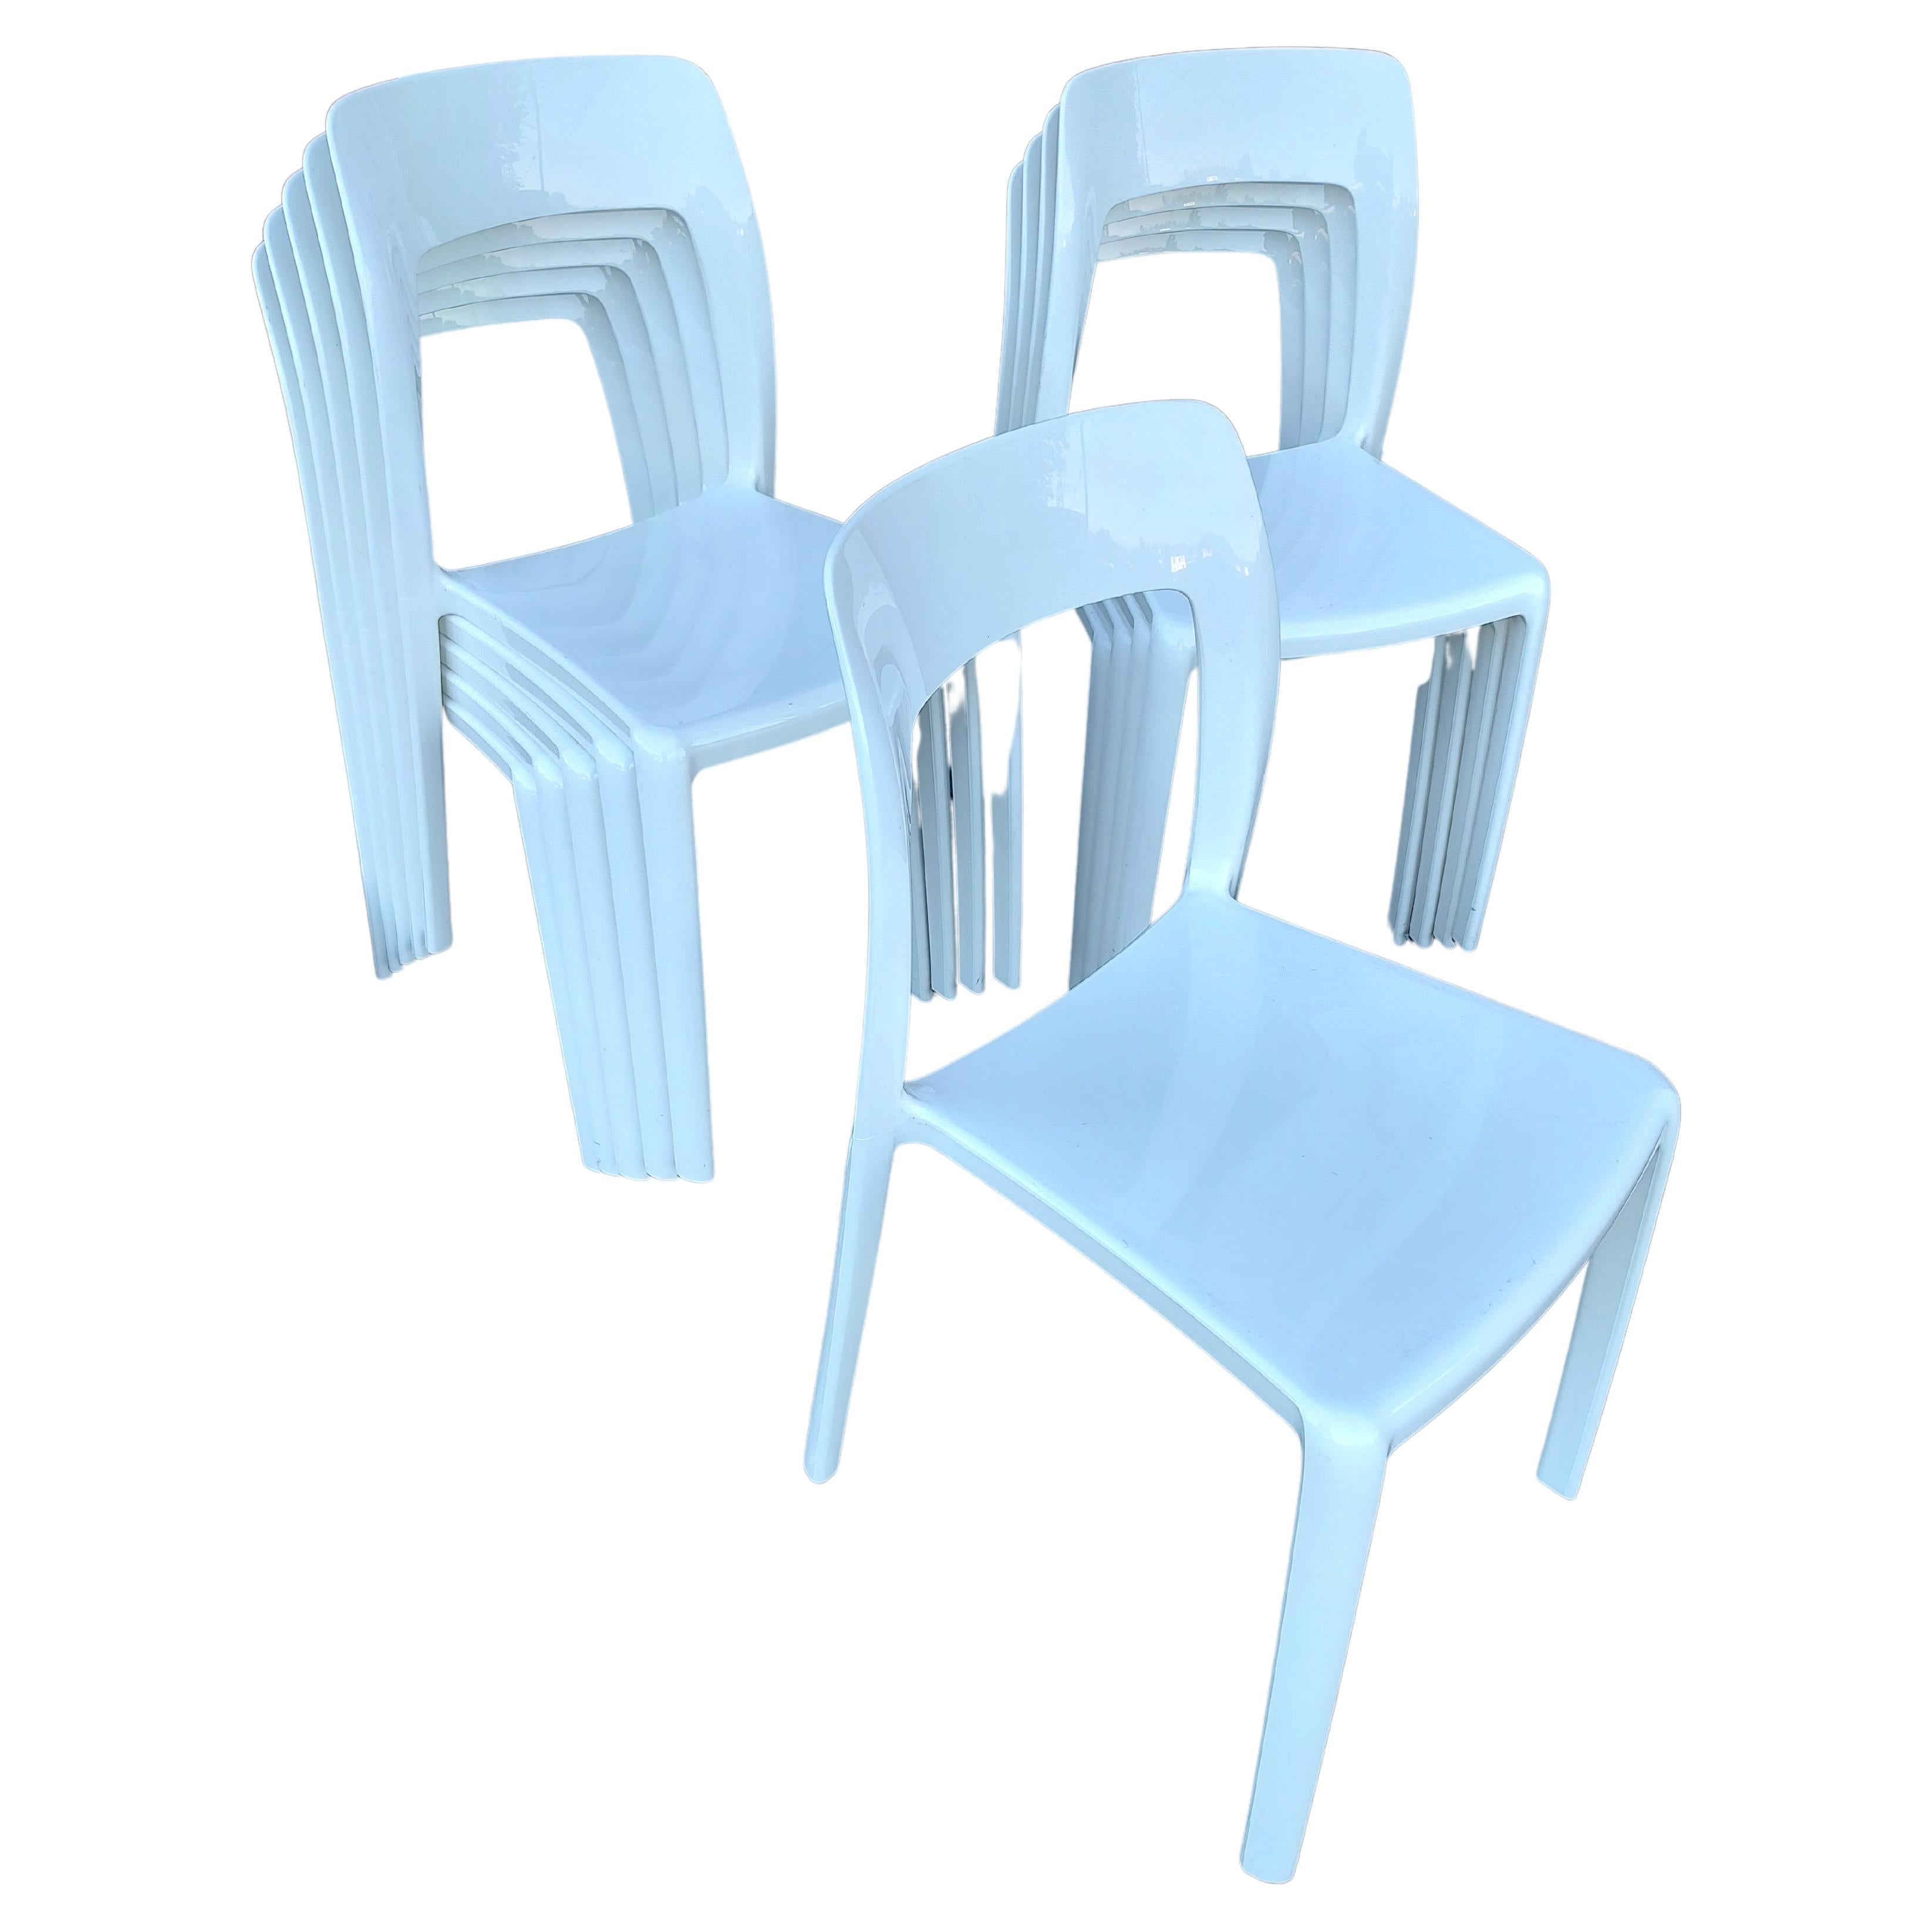 10 Mid Century Modern Stacking Chairs by AIR in White  For Sale